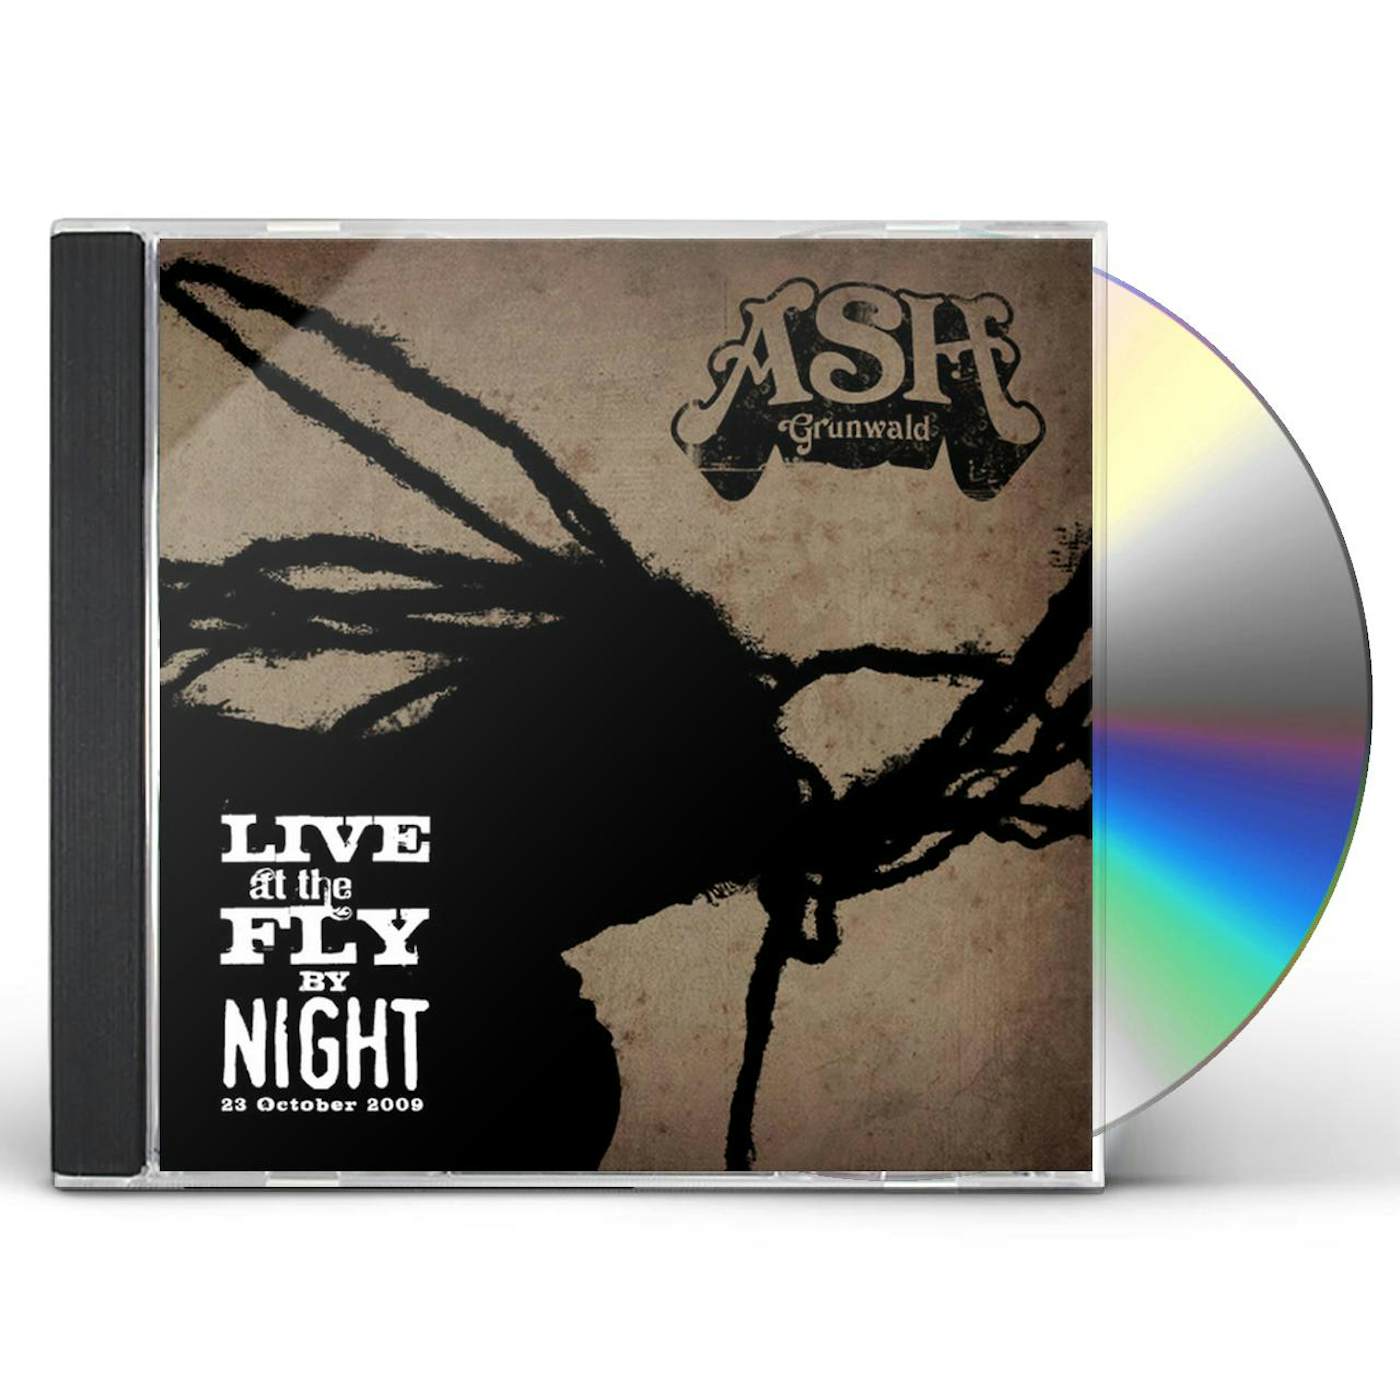 ASH GRUNWALD: LIVE AT THE FLY BY NIGHT CD